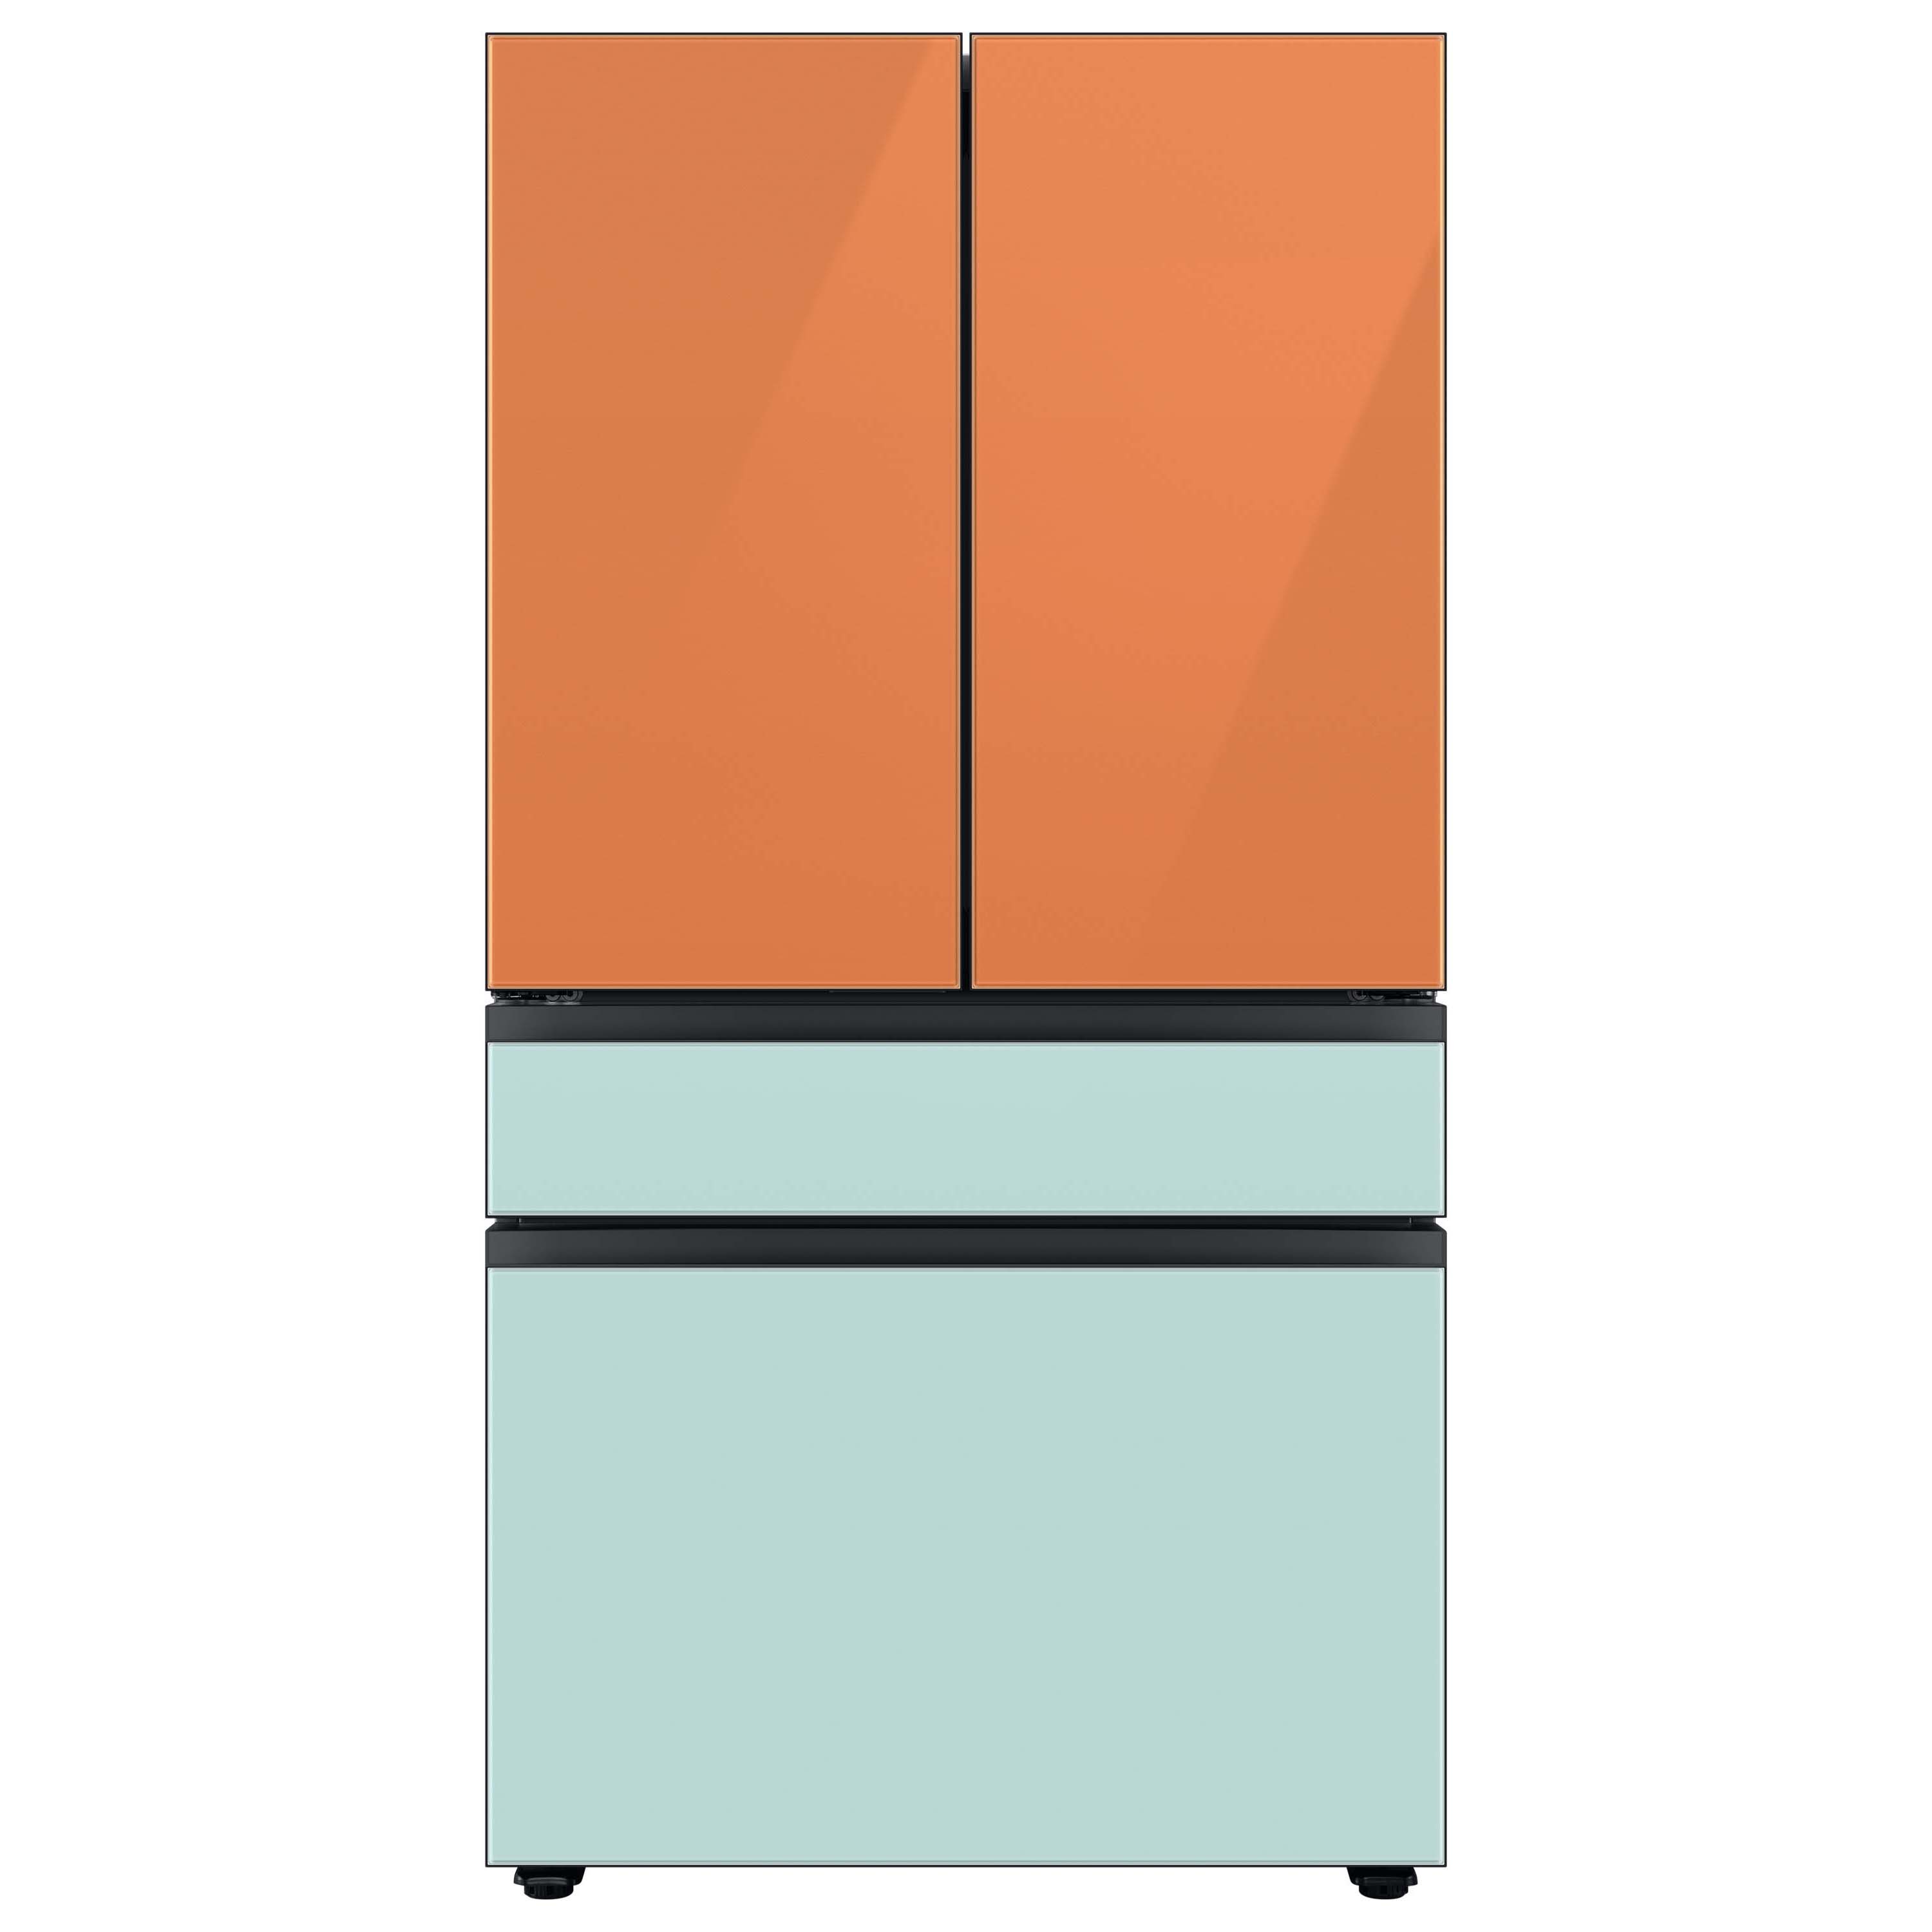 Bespoke-3-Door-French-Door-Refrigerator-Panel-in-Morning-Blue-Glass-Bottom-Panel  Home Appliances Accessories - RA-F36DB3CM/AA